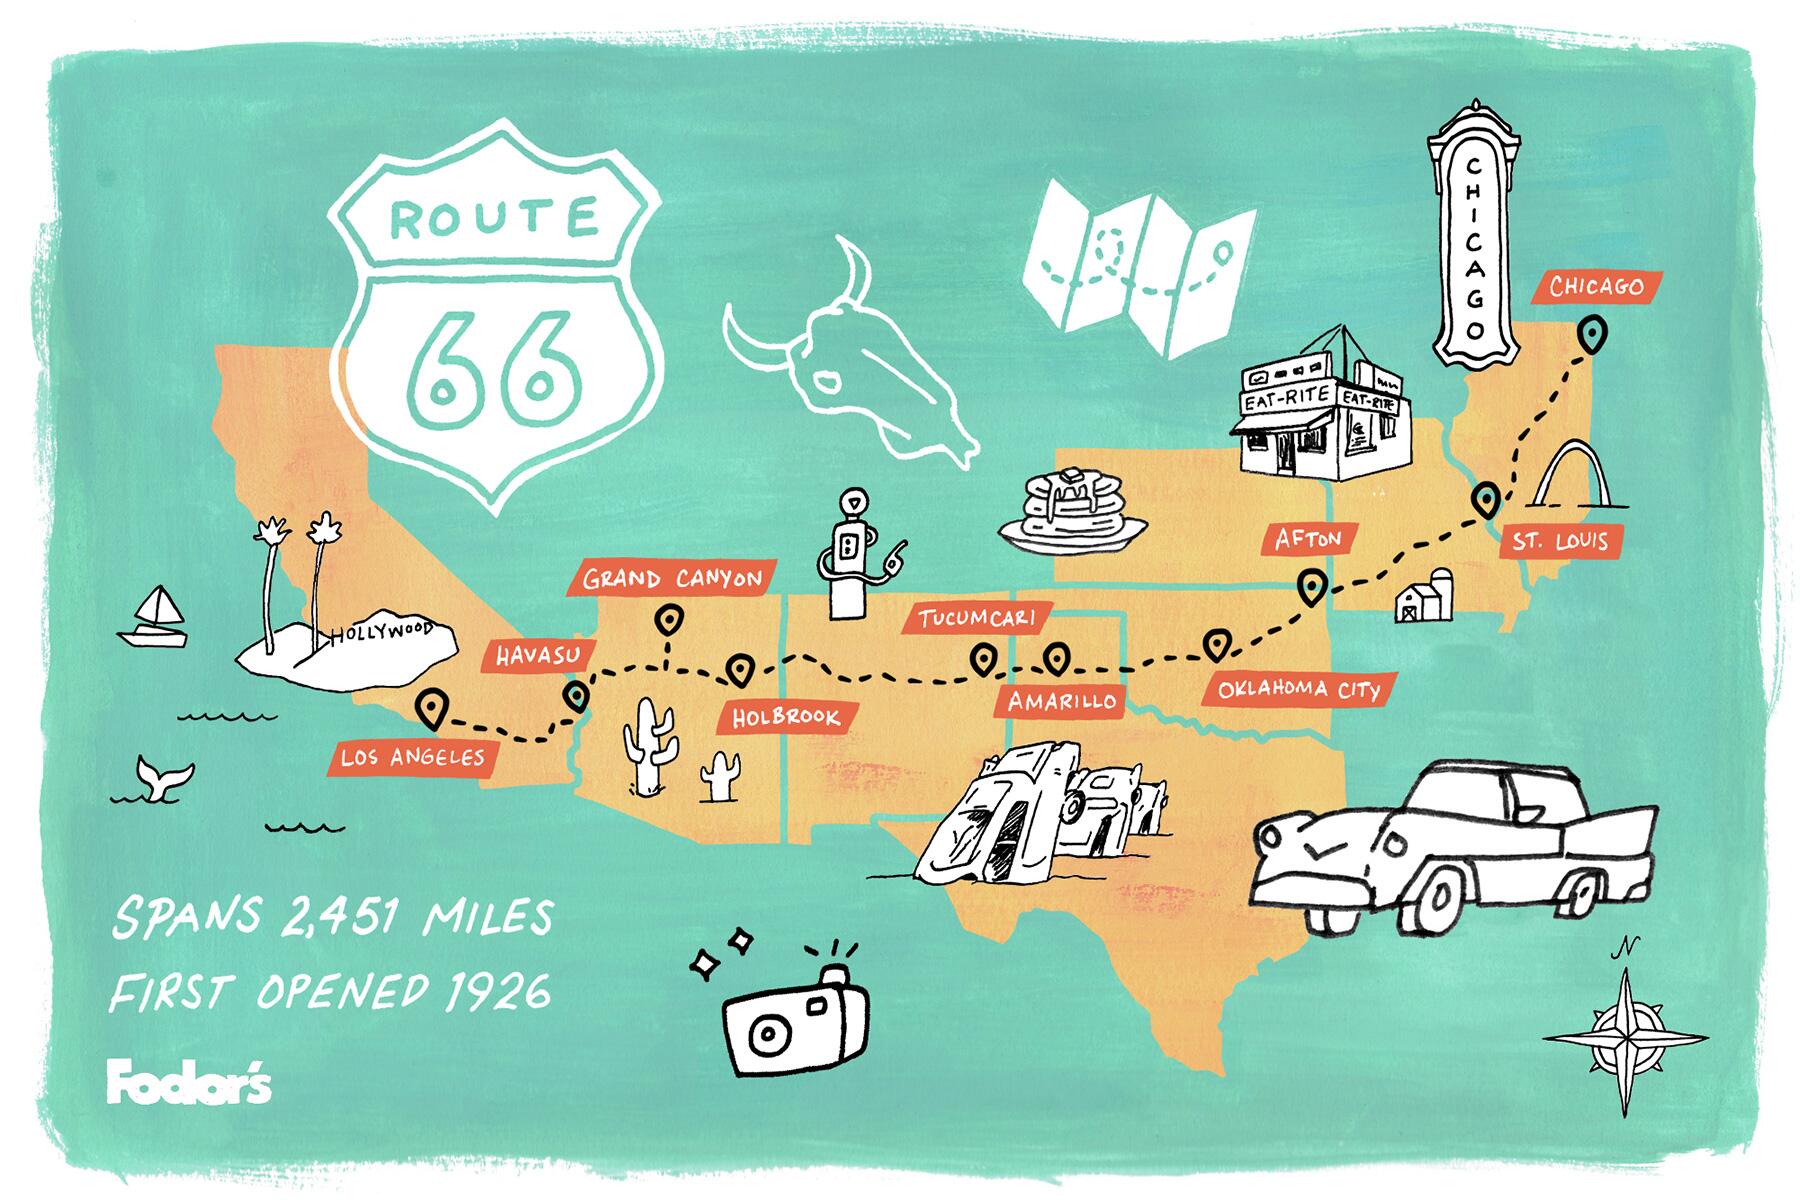 Road Trip Itinerary: Route 66 From Los Angeles to Chicago and Back Again